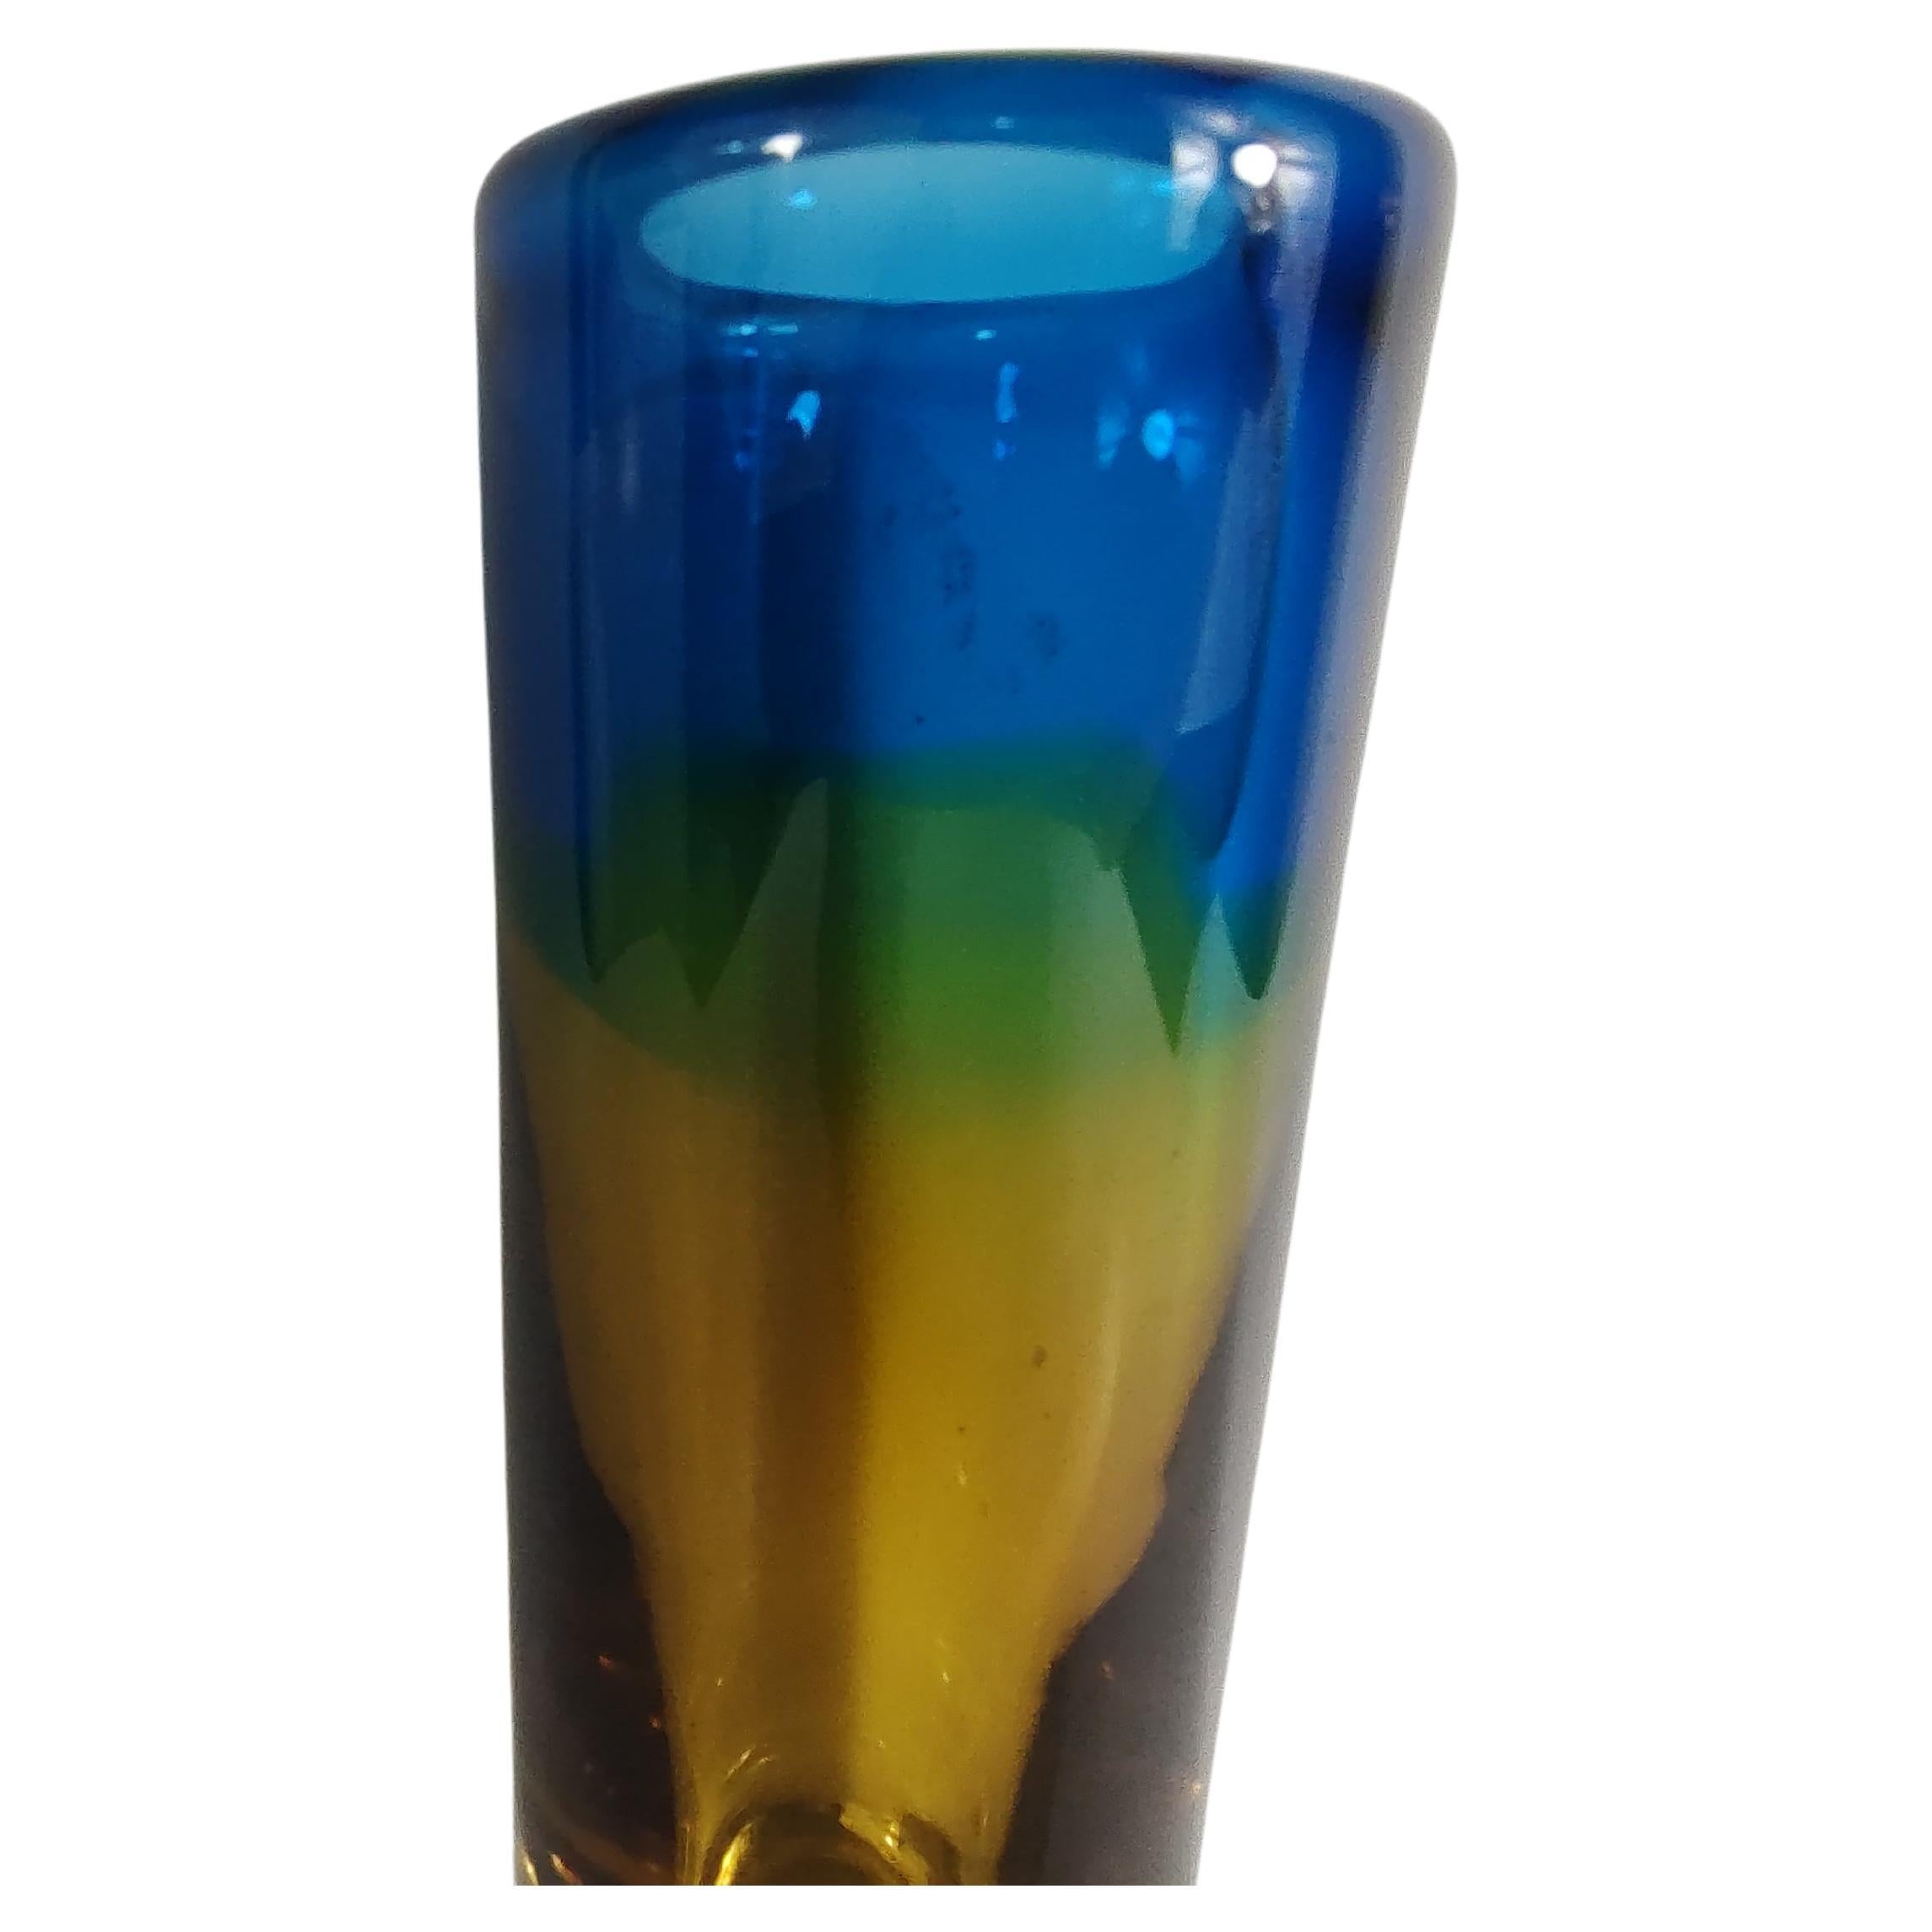 Fabulous piece of Art Glass by Vicke Lindstrand for Kosta Boda. Clear thick base which changes to yellow, green then blue. In excellent vintage condition with minimal wear to the base. No damage. Signed and numbered. Polished Pontil.